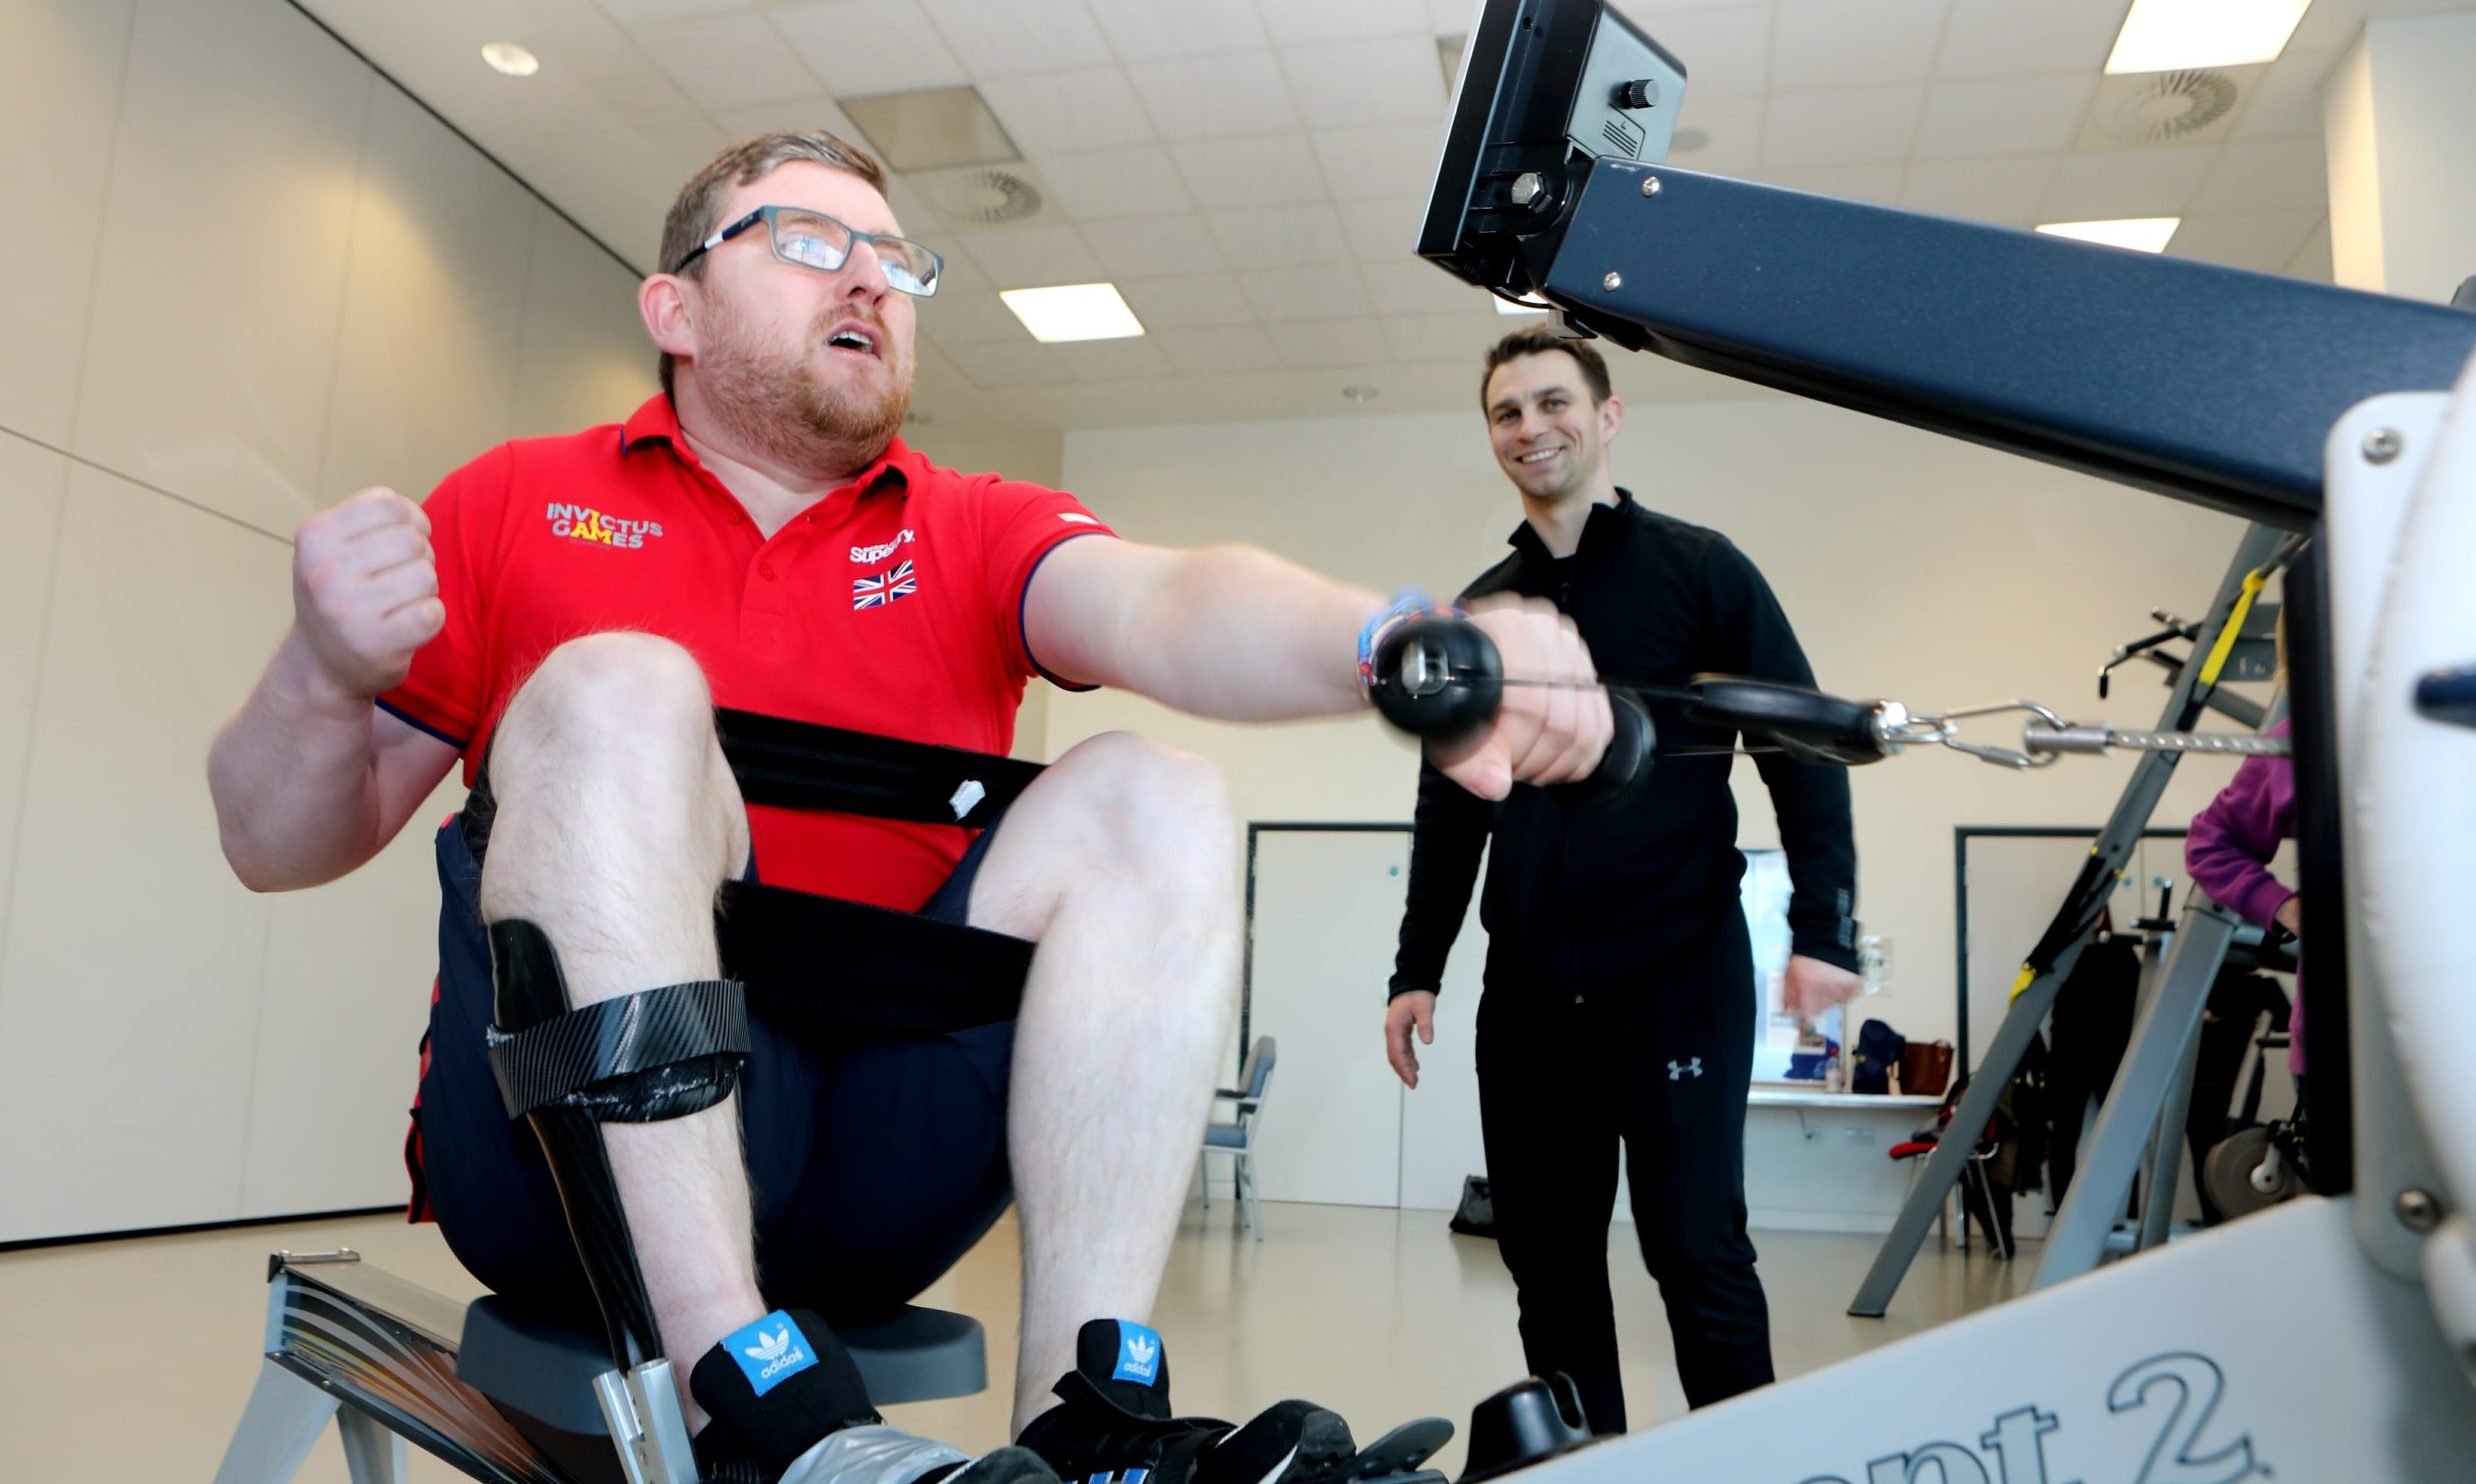 Ex-Royal Navy Officer Stuart Padley from Glenrothes is taking part in rowing and archery in the forthcoming Invictus Games.